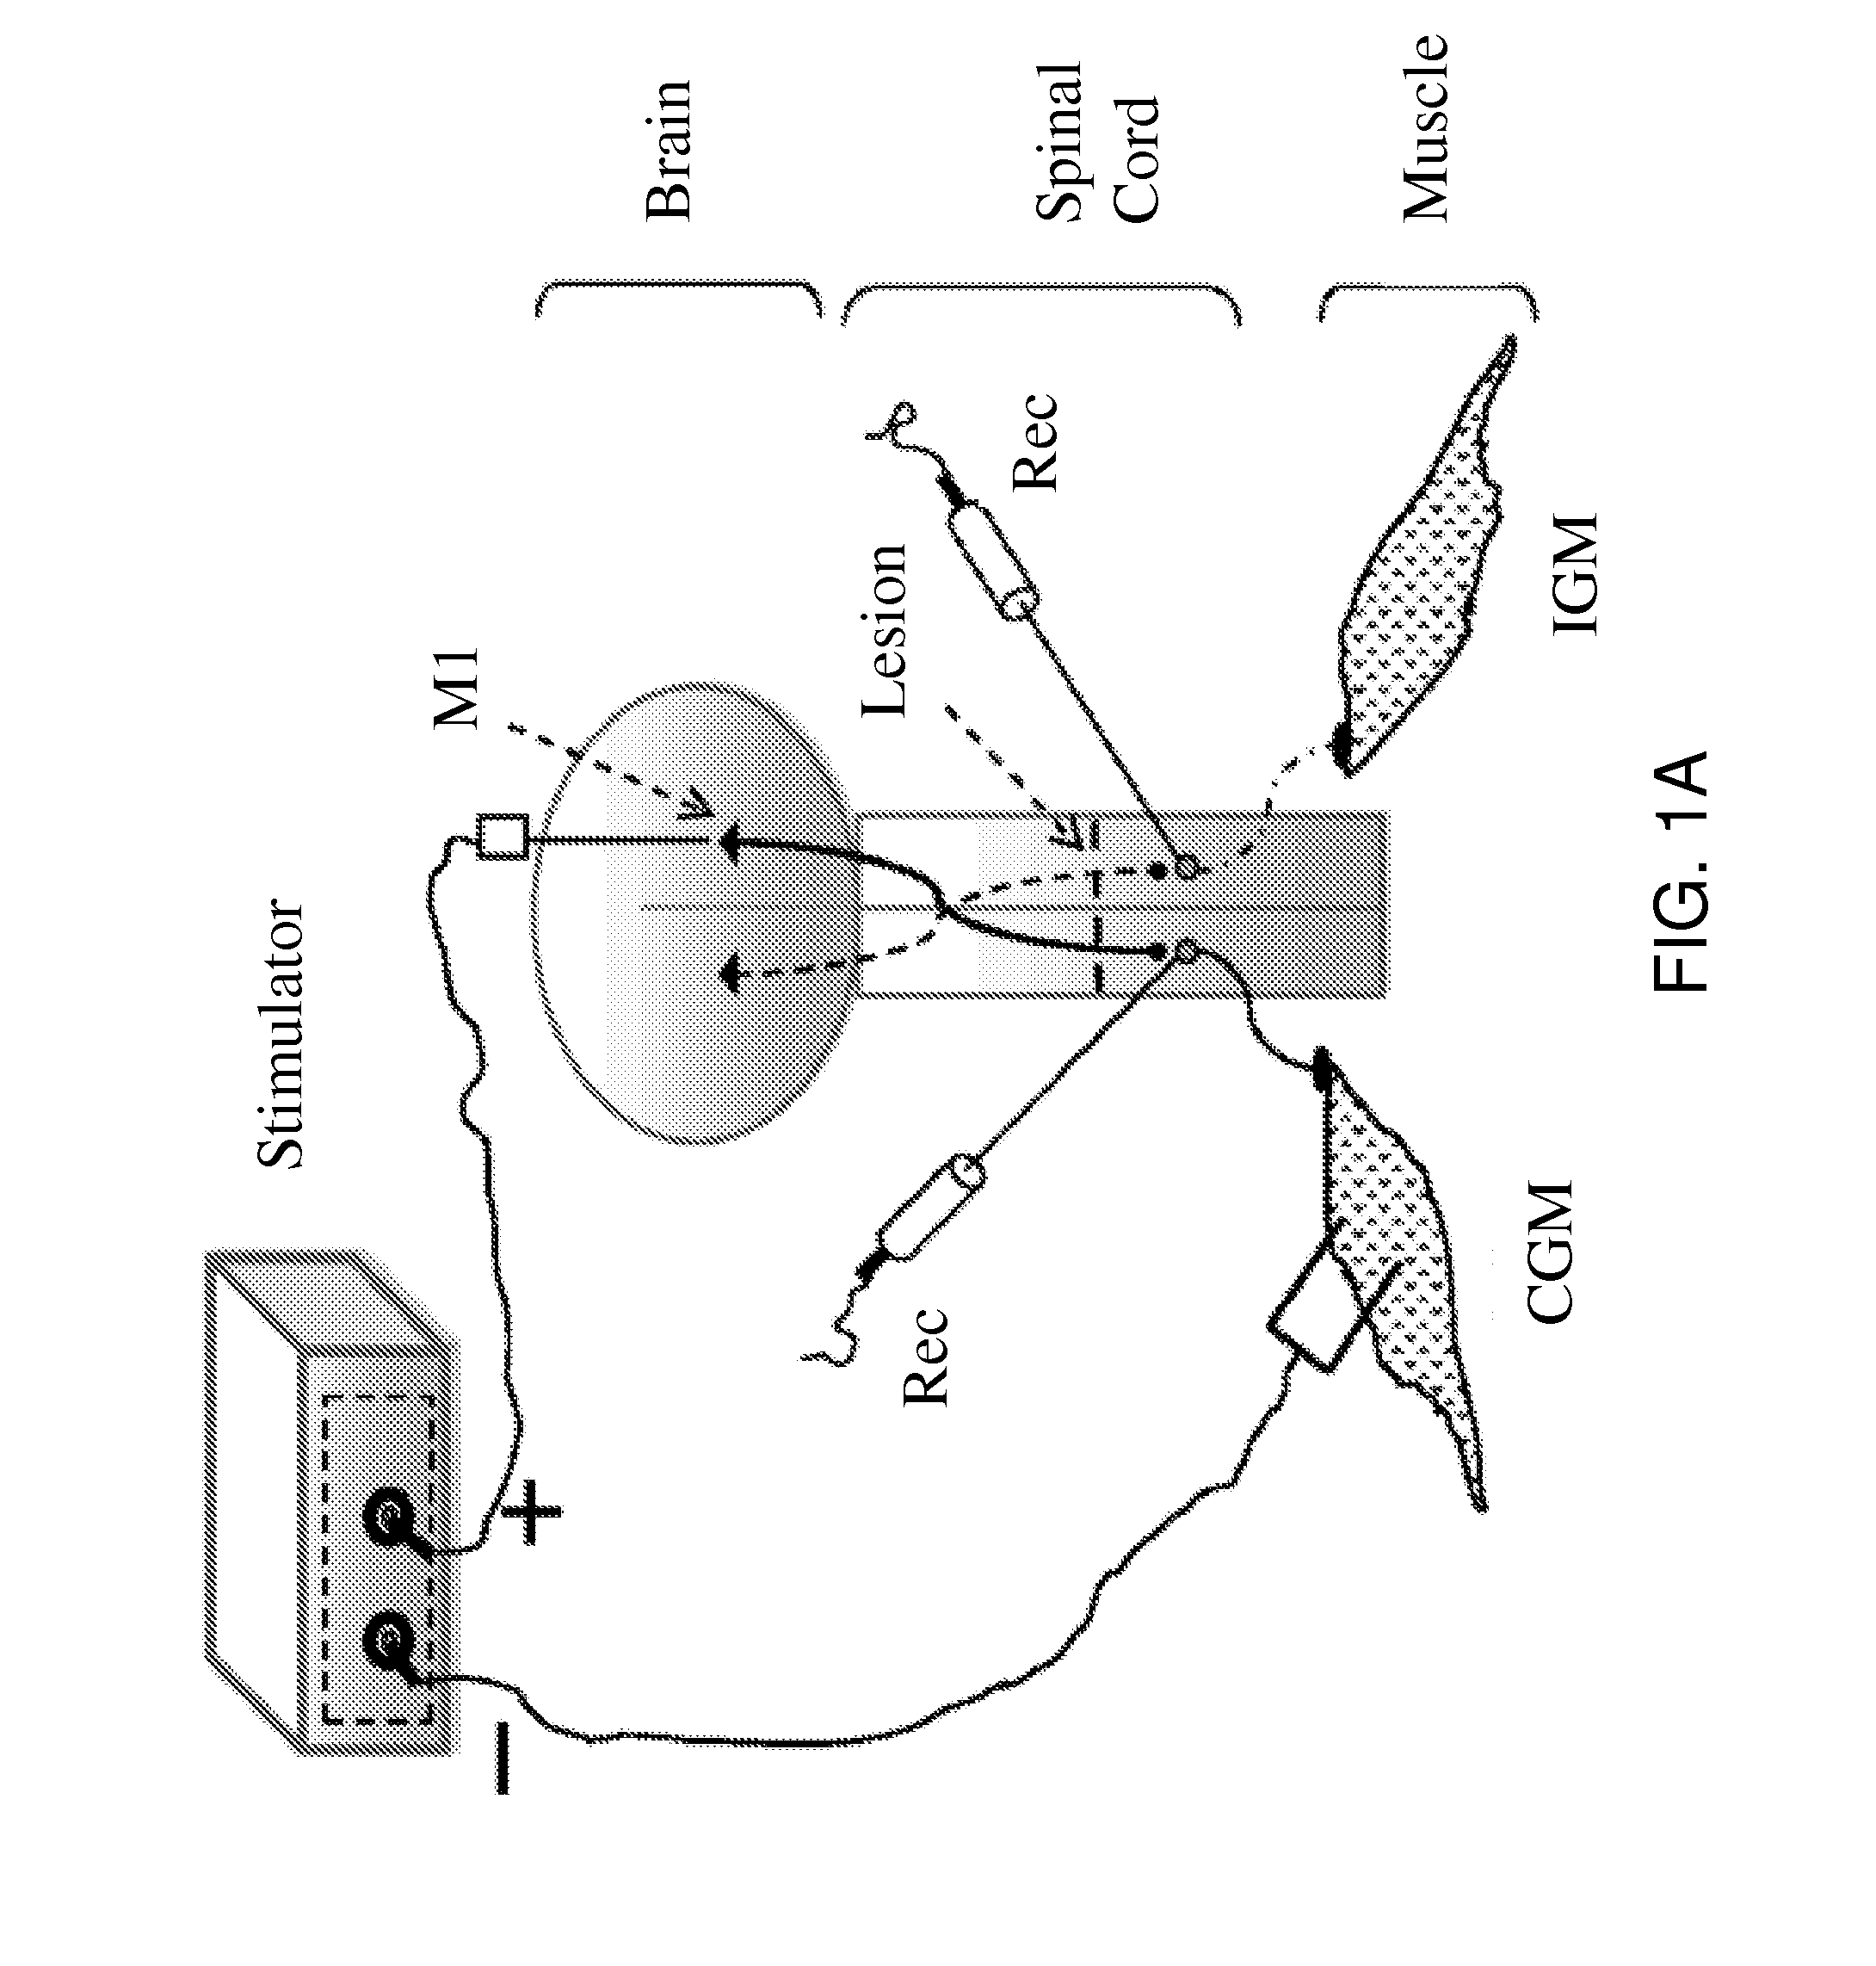 Charge-enhanced neural electric stimulation system